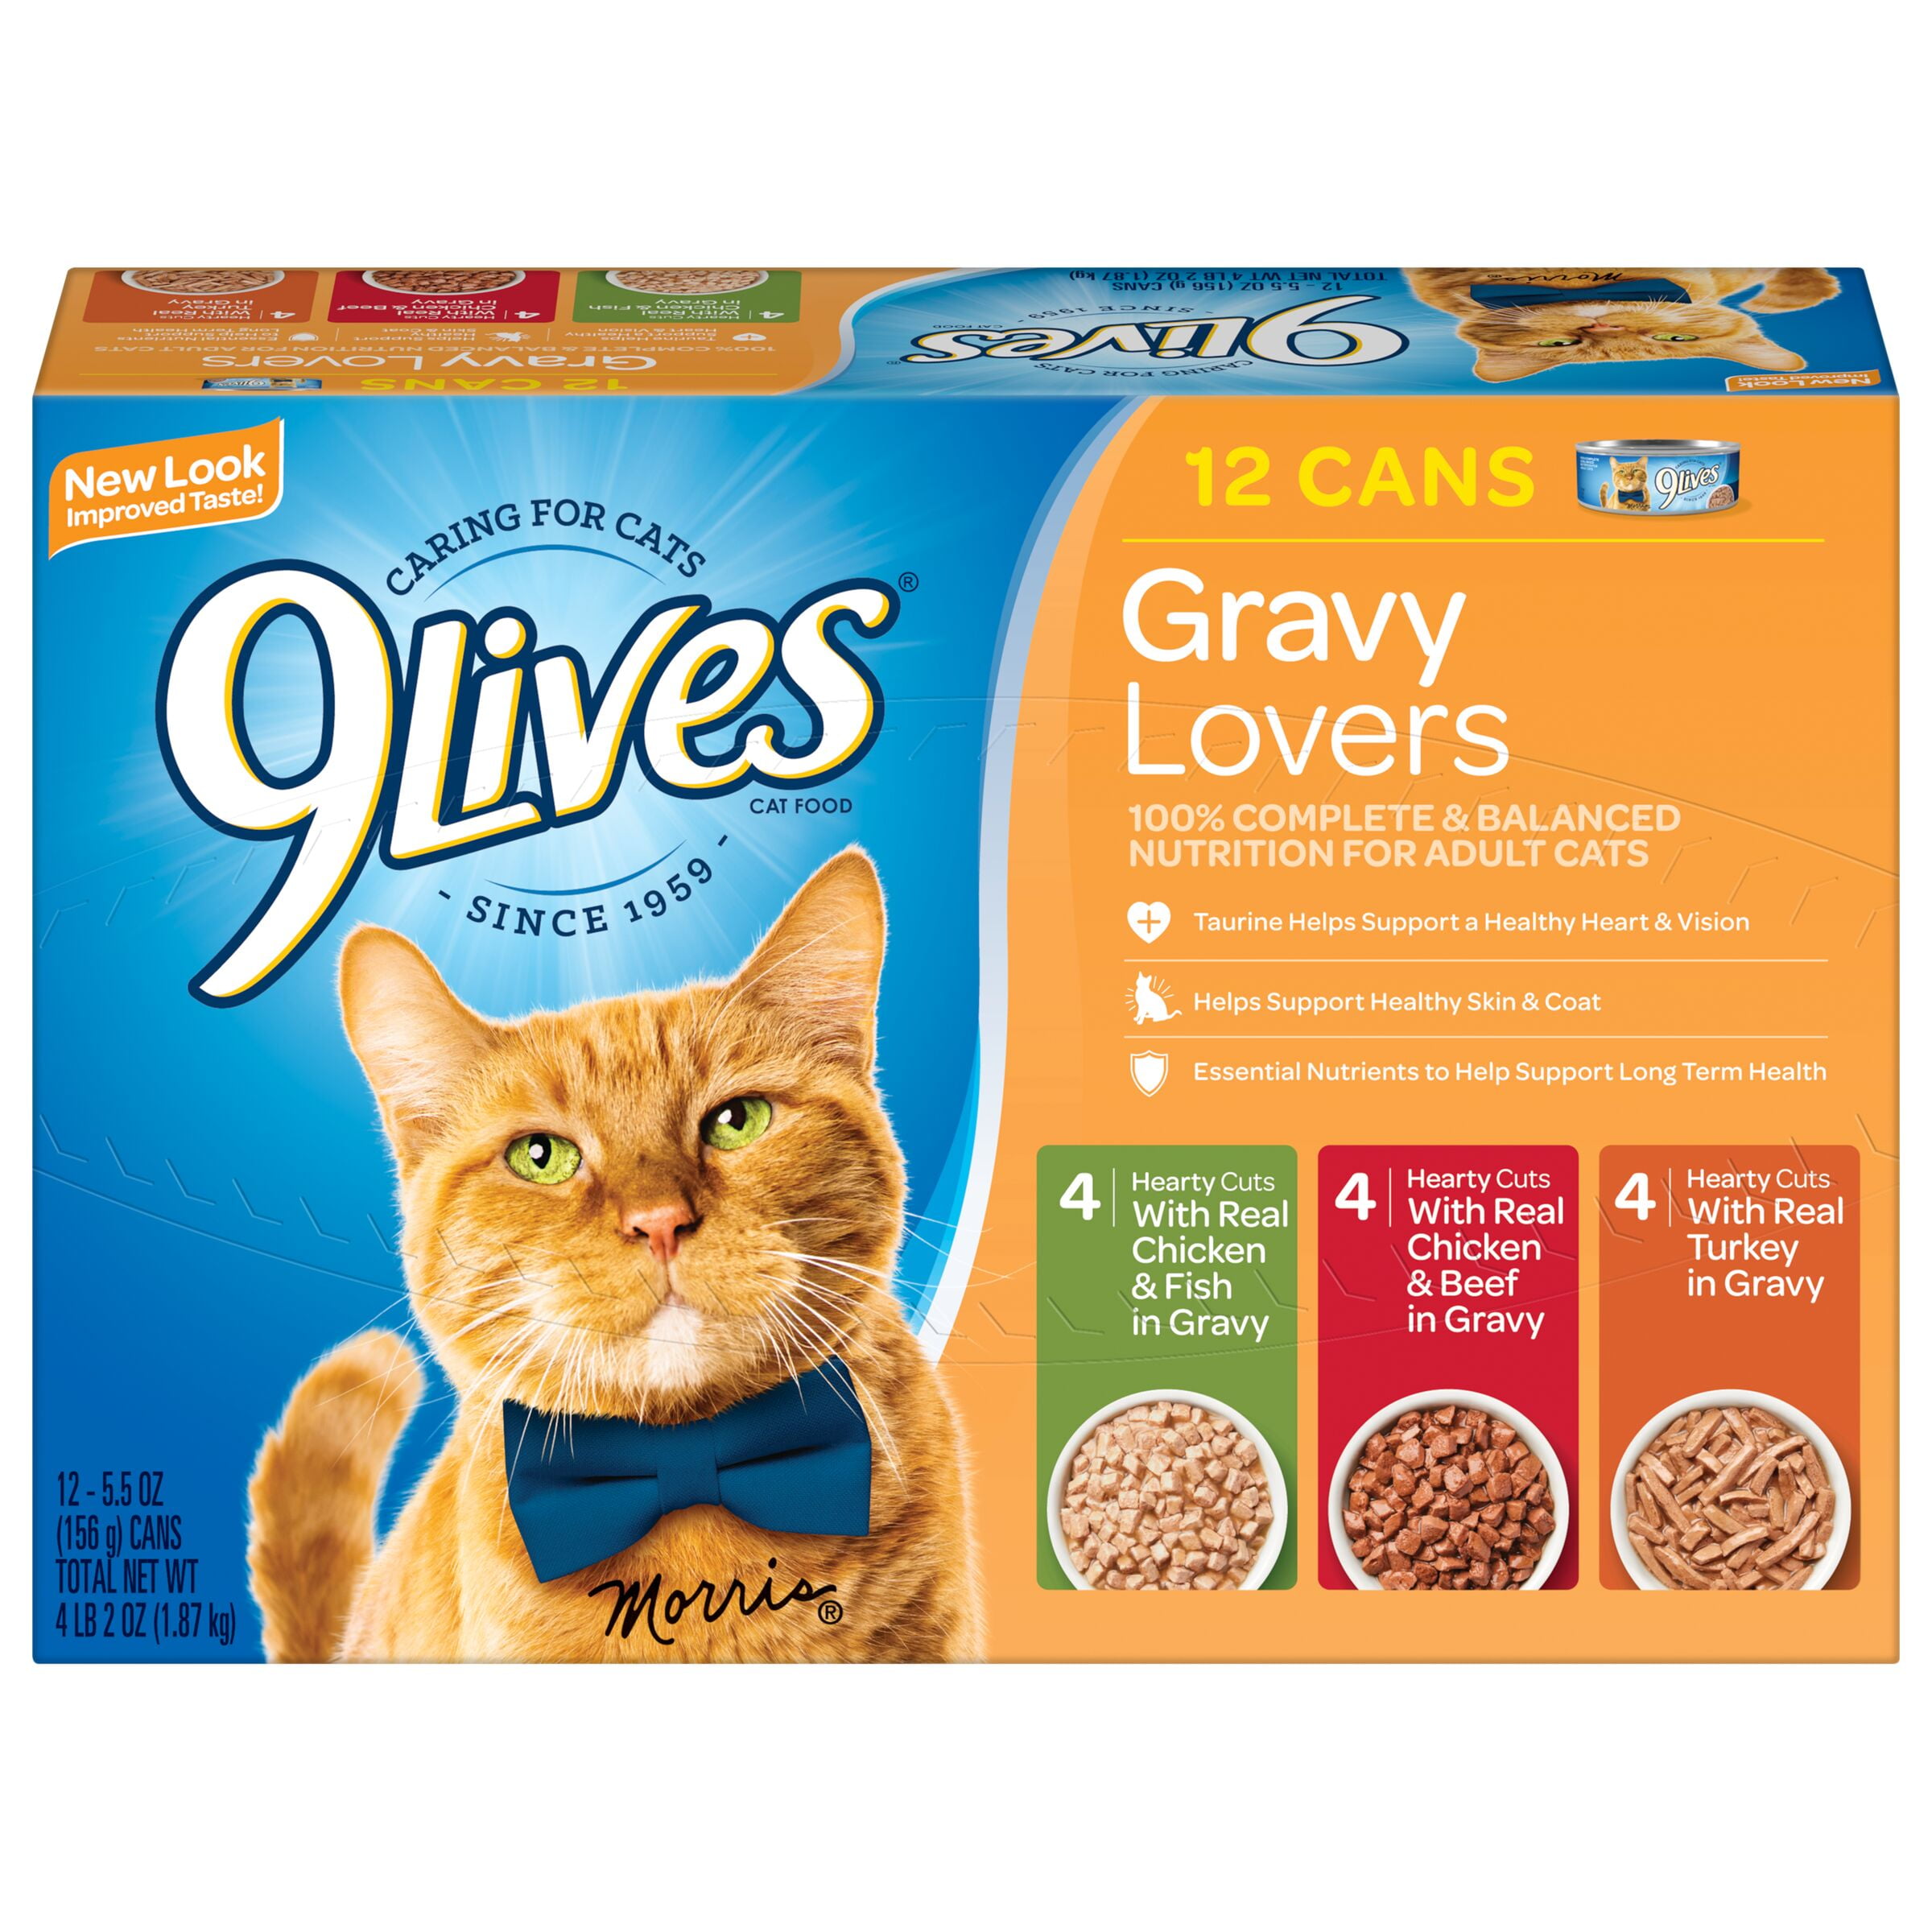 9 Lives Gravy Favorites Wet Cat Food Variety Pack, 5.5Ounce Cans, 12